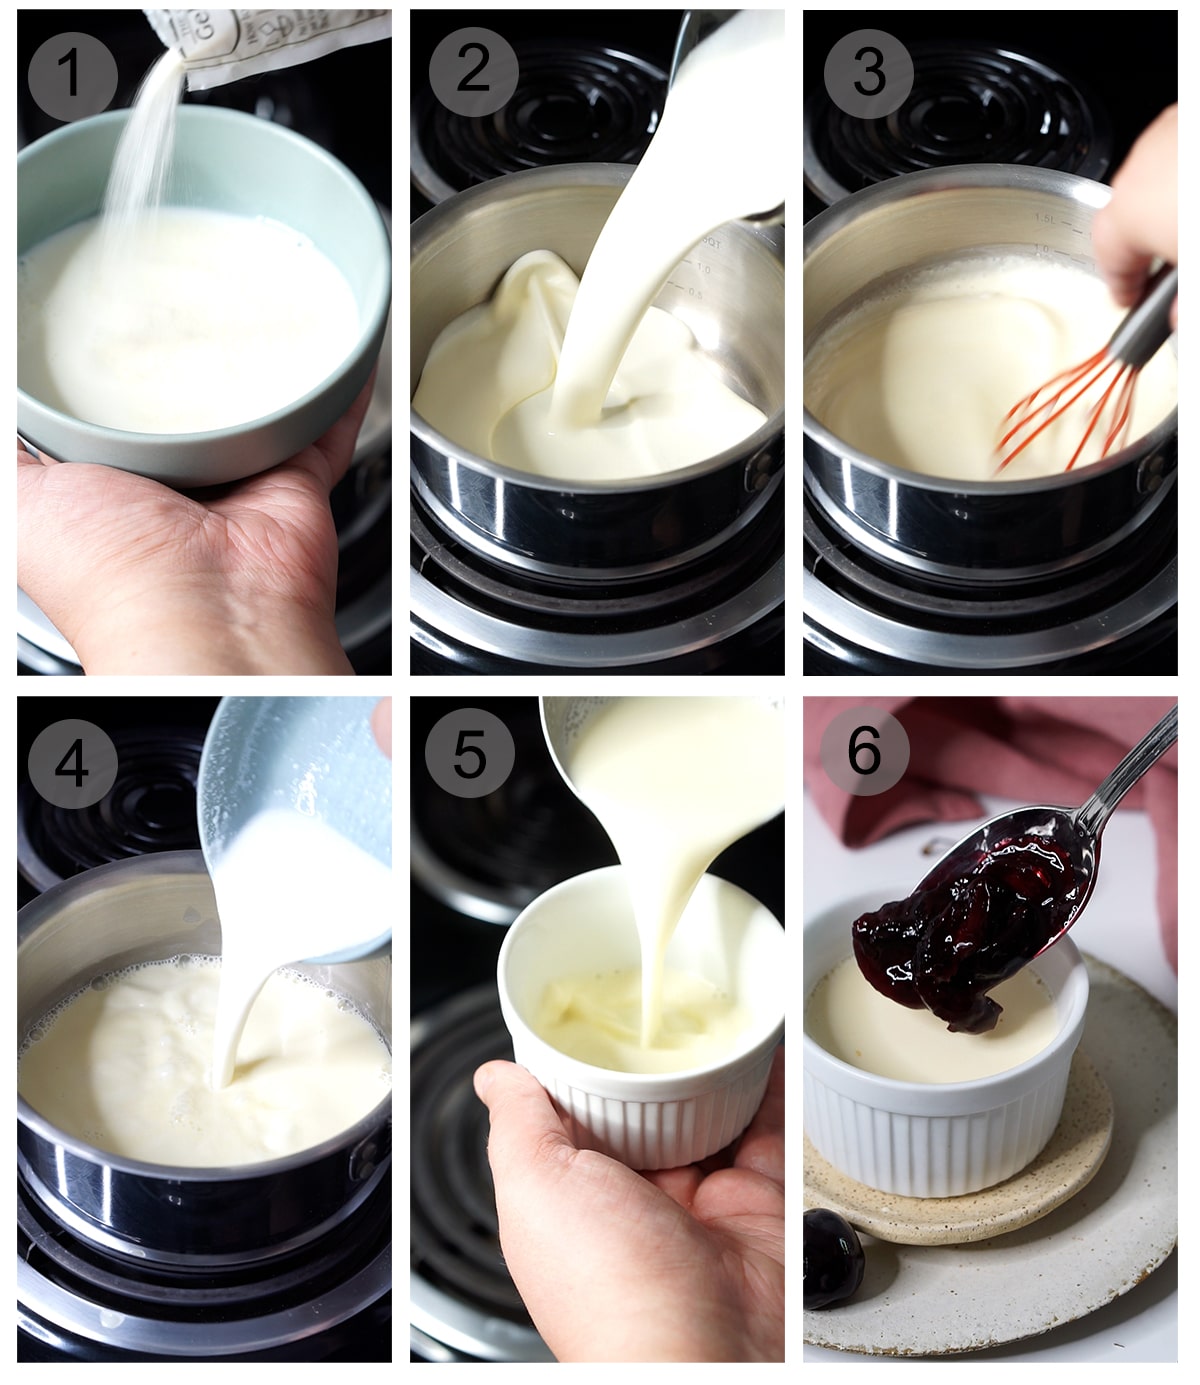 Step by step photos on how to make panna cotta